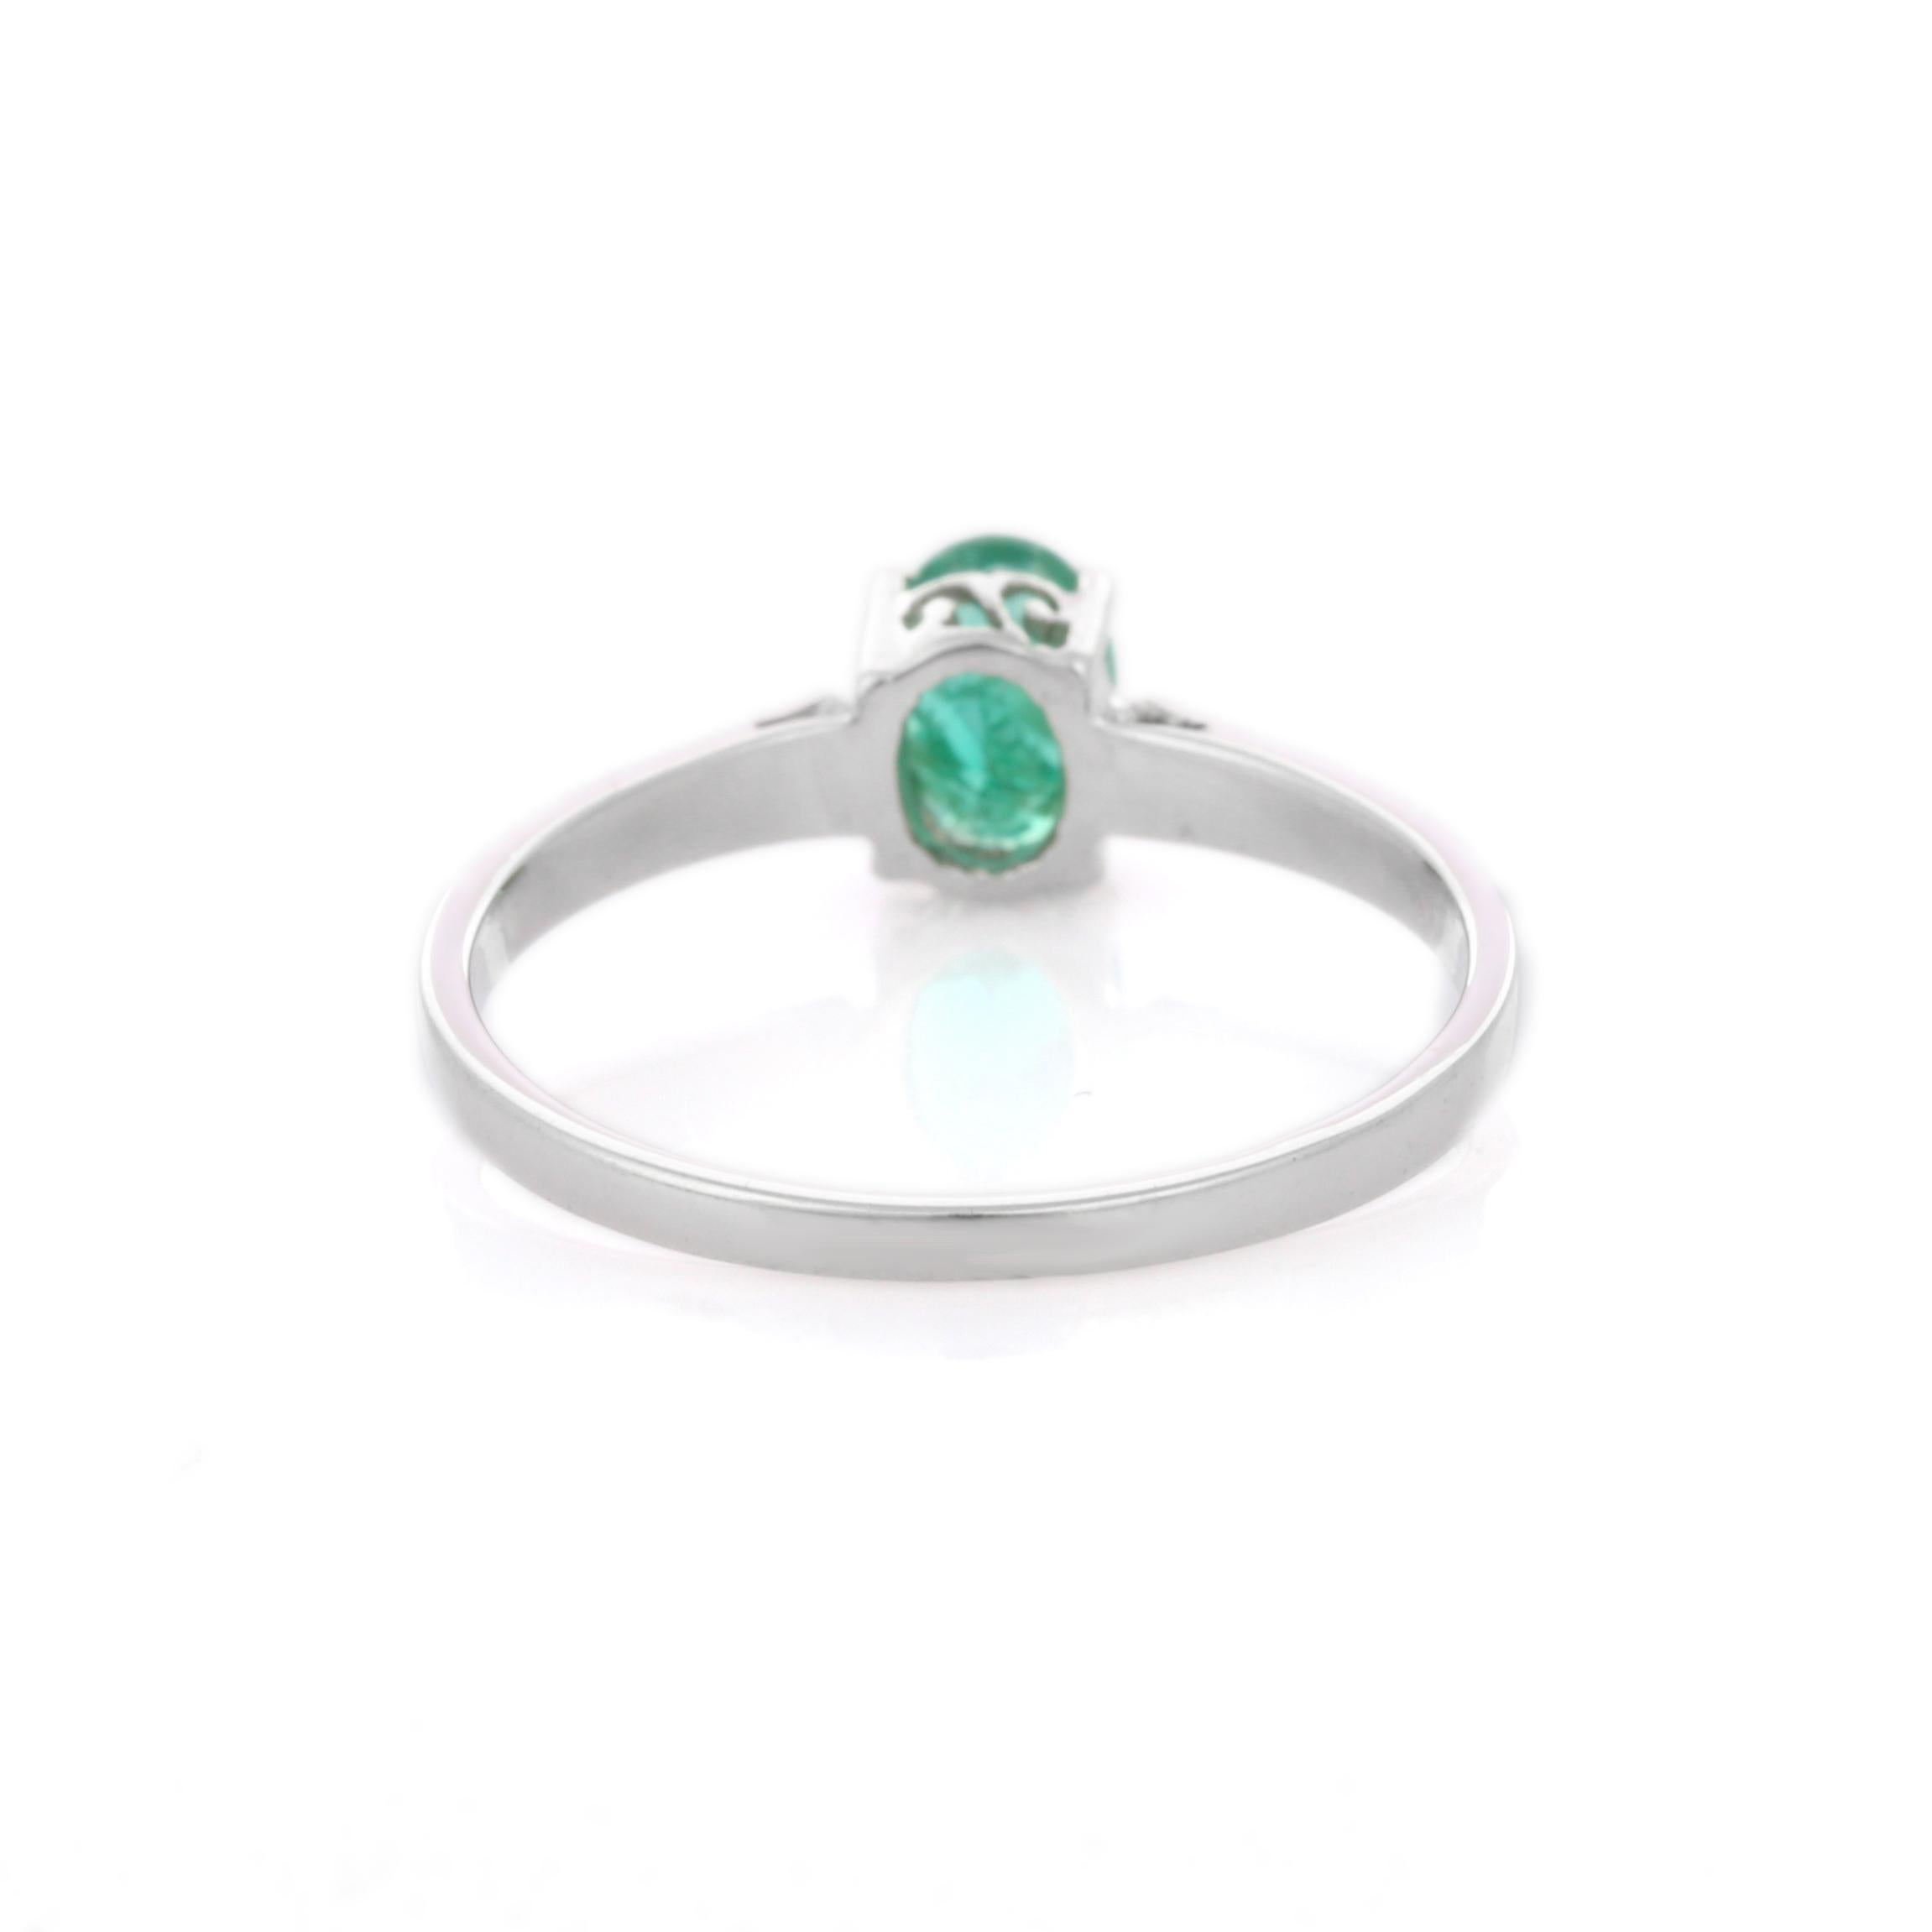 For Sale:  18K White Gold Minimalist Oval Cut Emerald Gemstone Stackable Solitaire Ring  4